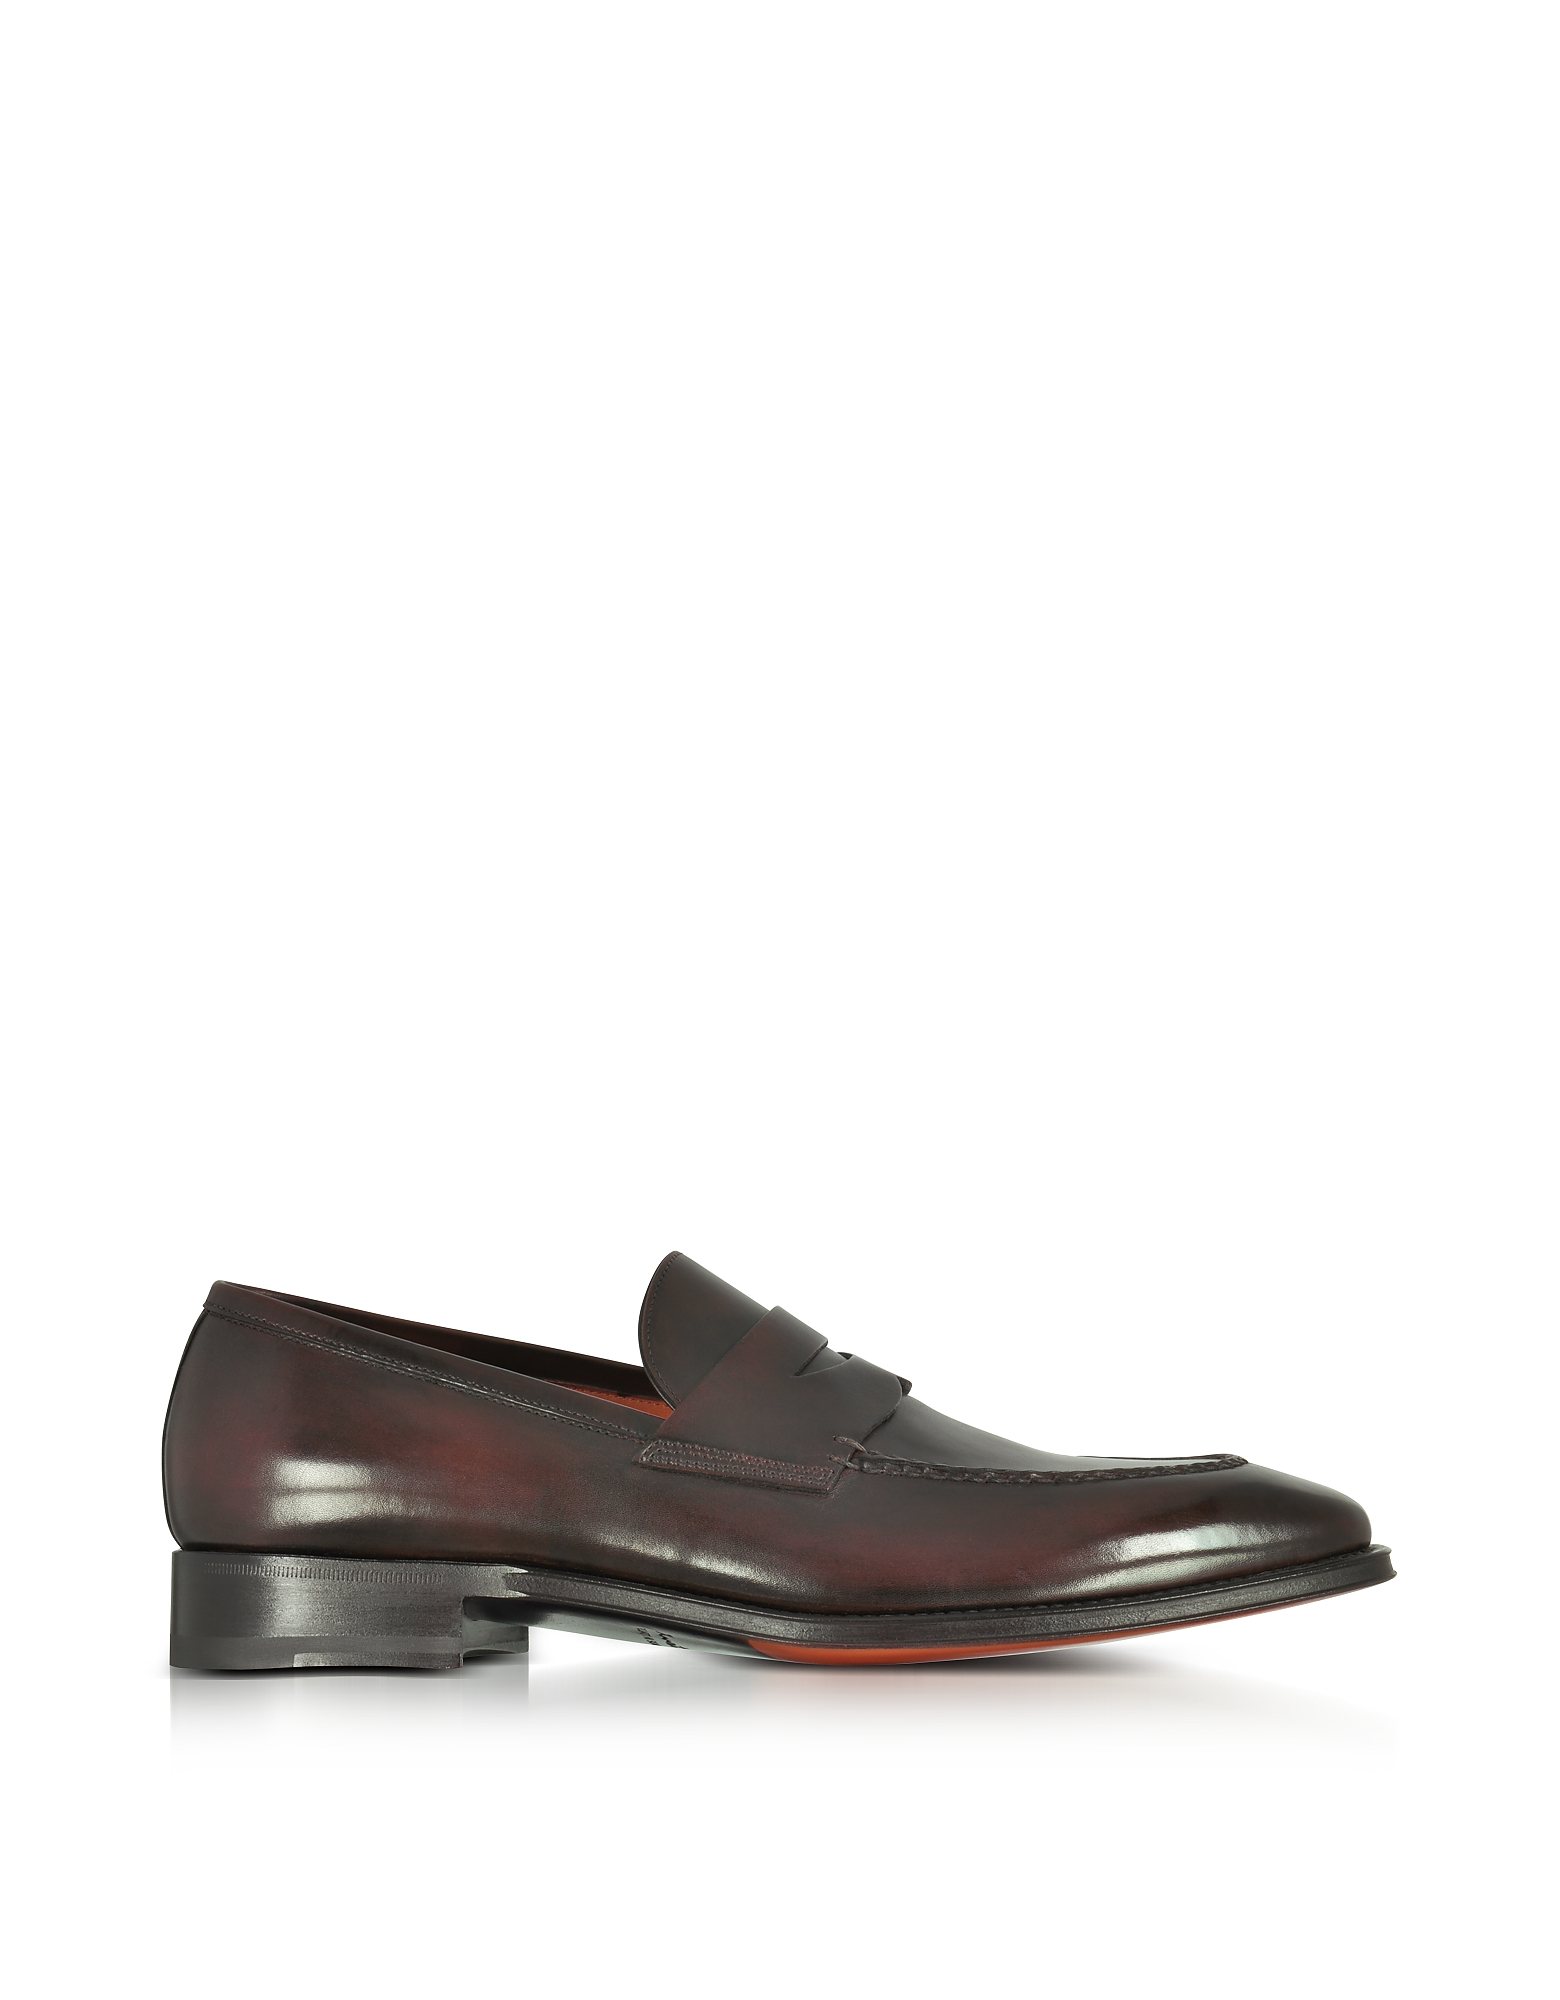 

Duke Dark Brown Leather Penny Loafer Shoes